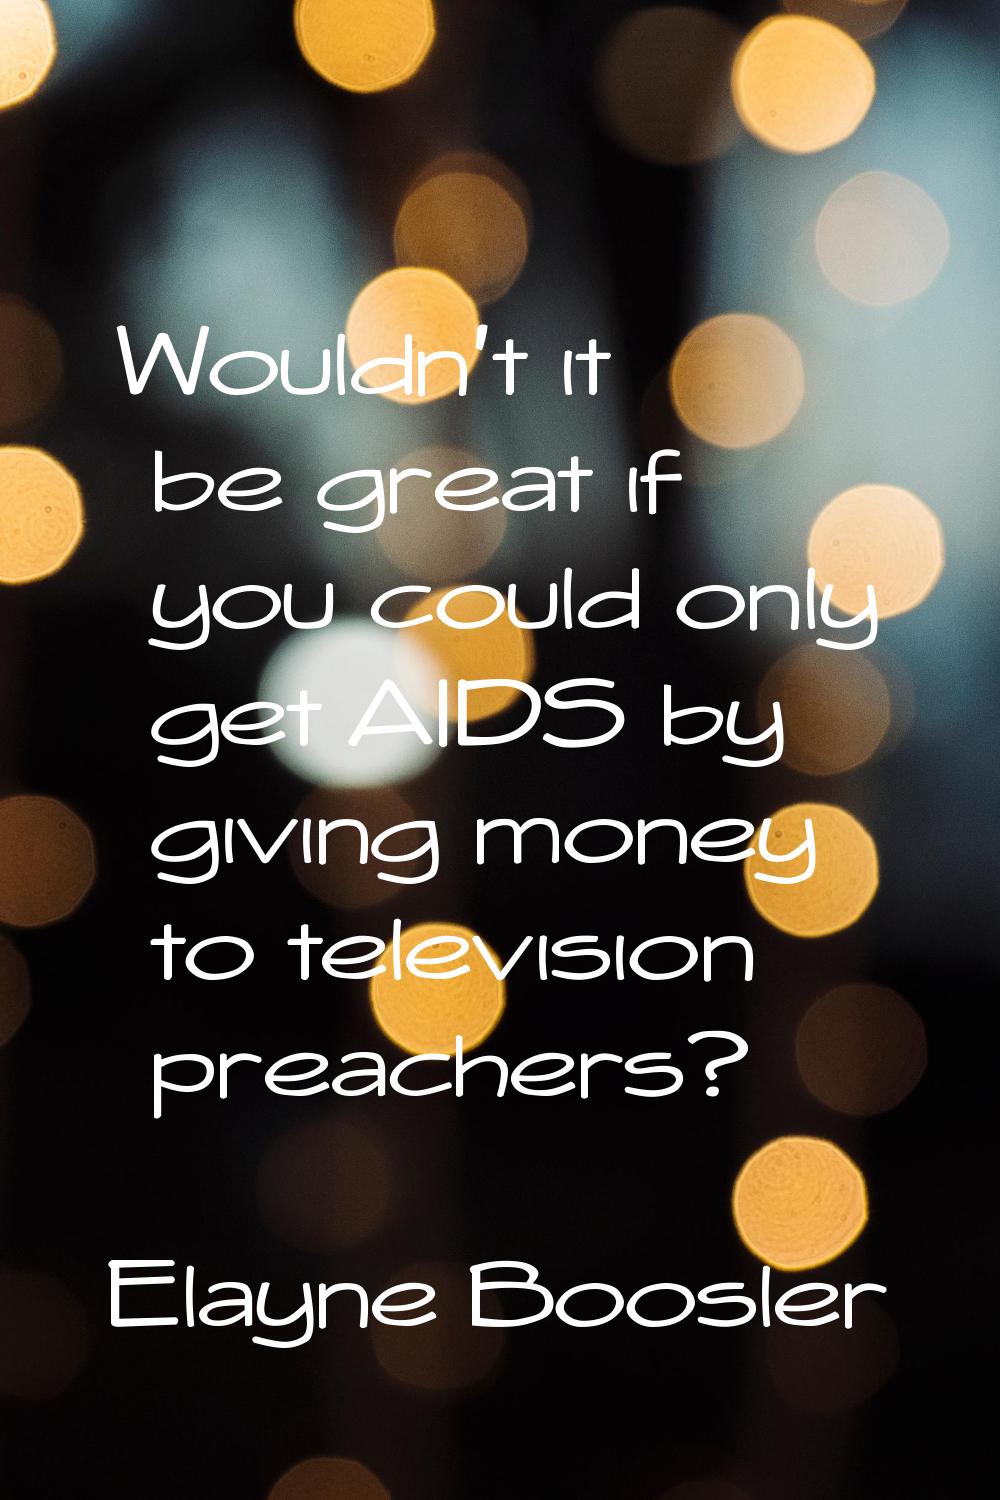 Wouldn't it be great if you could only get AIDS by giving money to television preachers?